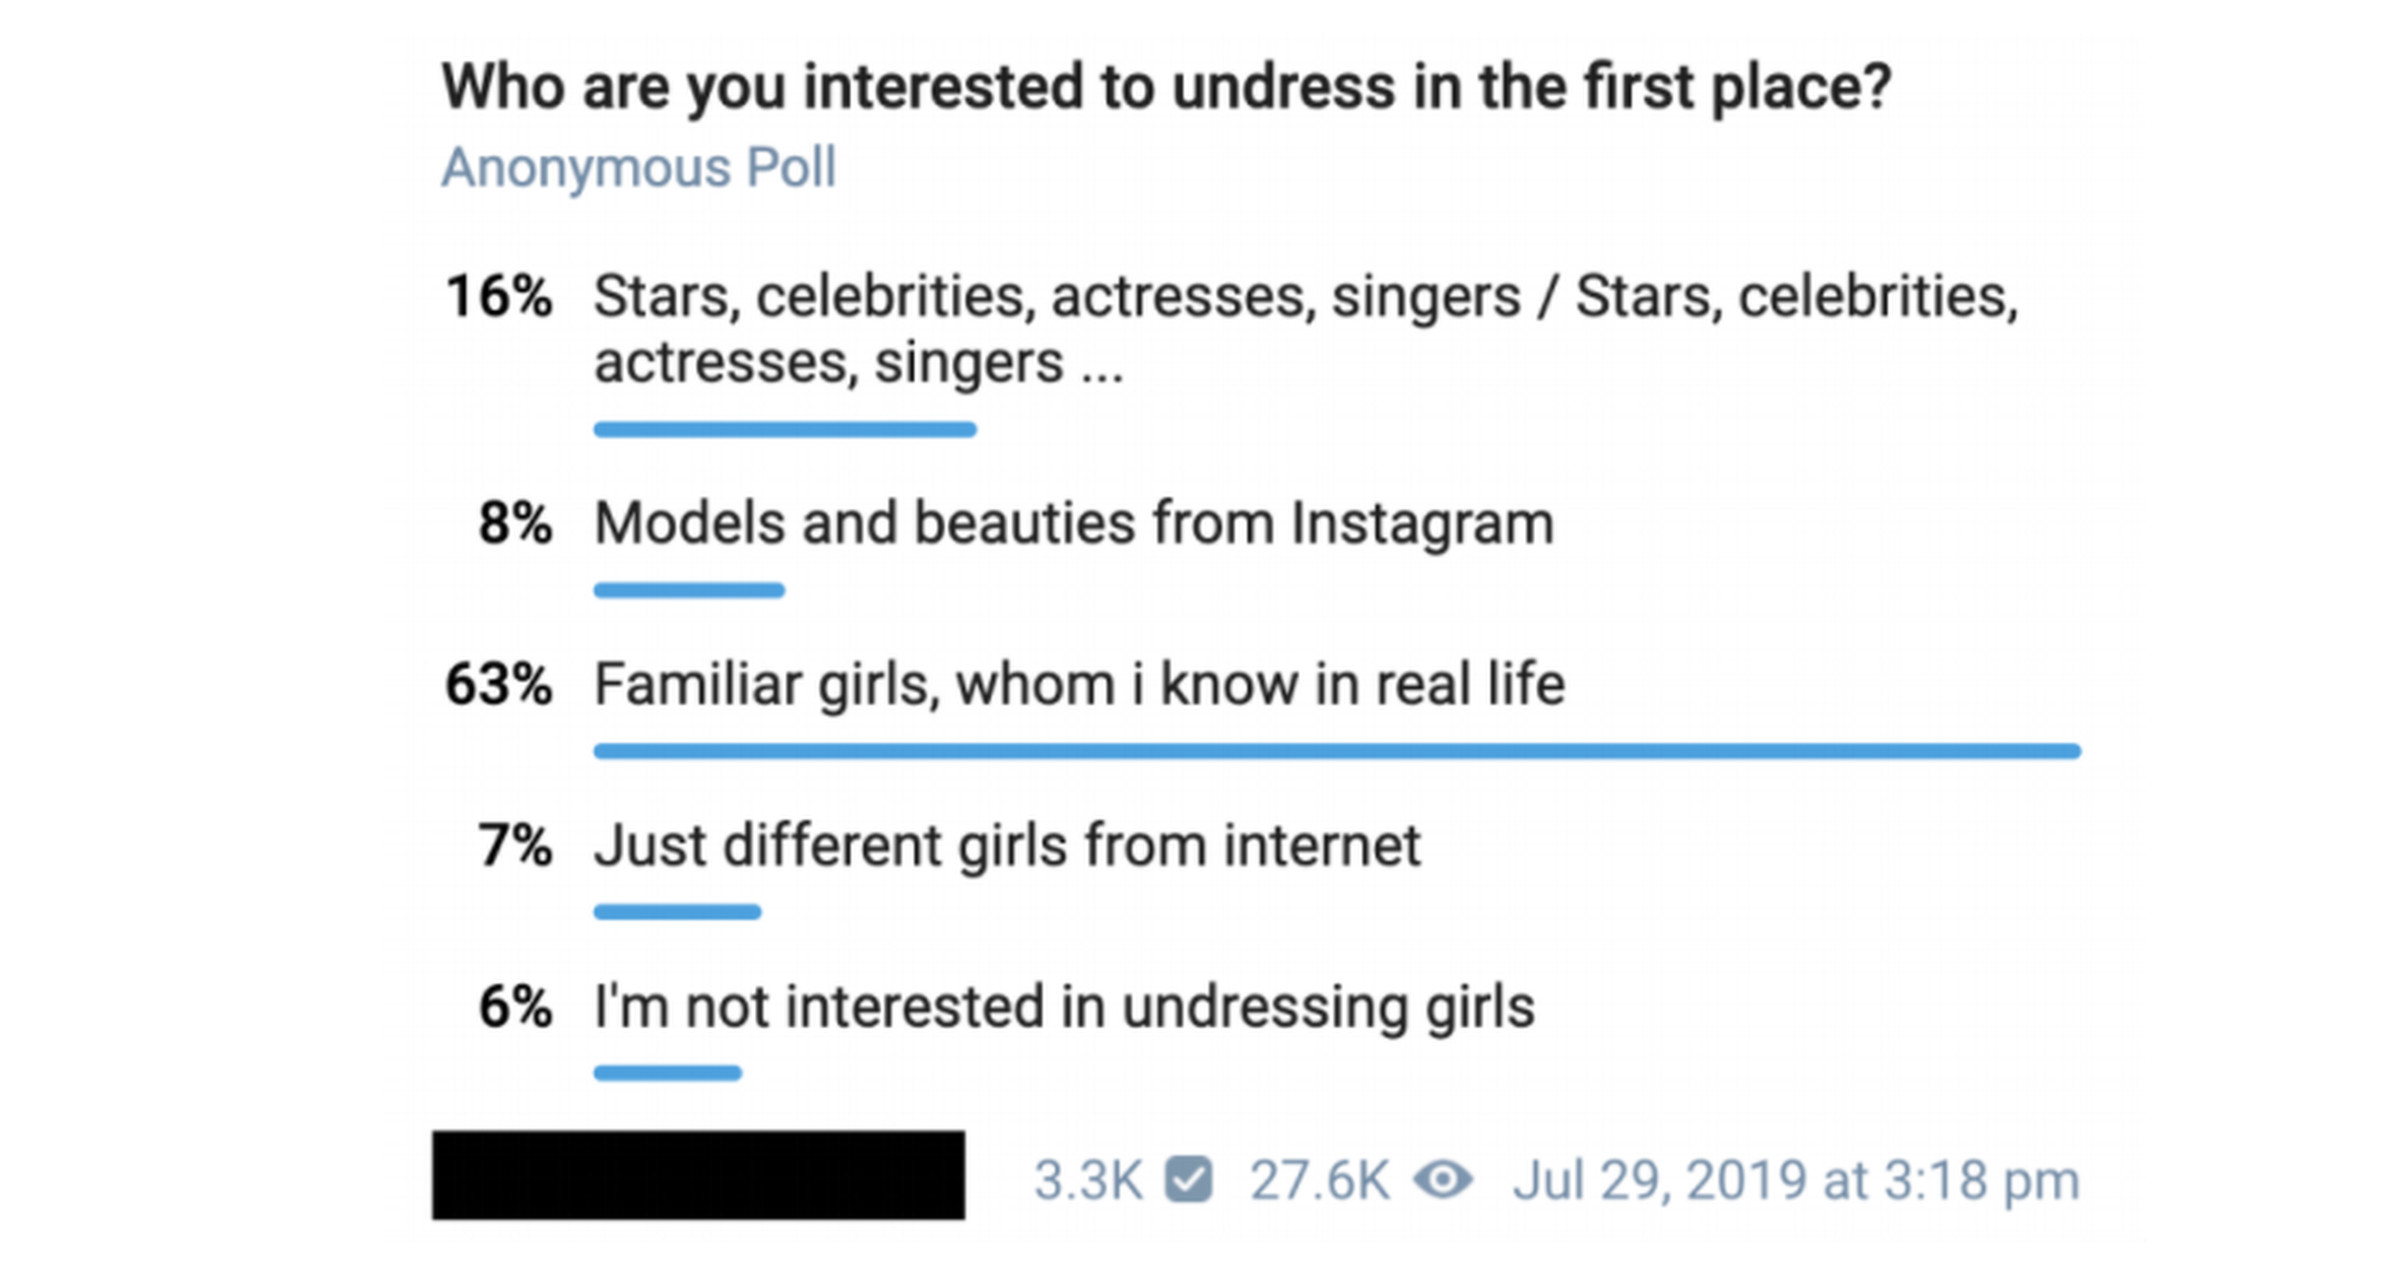 In a poll in one of the main channels for sharing deepfake nudes (originally posted in both Russian and English), most users said they wanted to generate images of women they knew in “real life.”